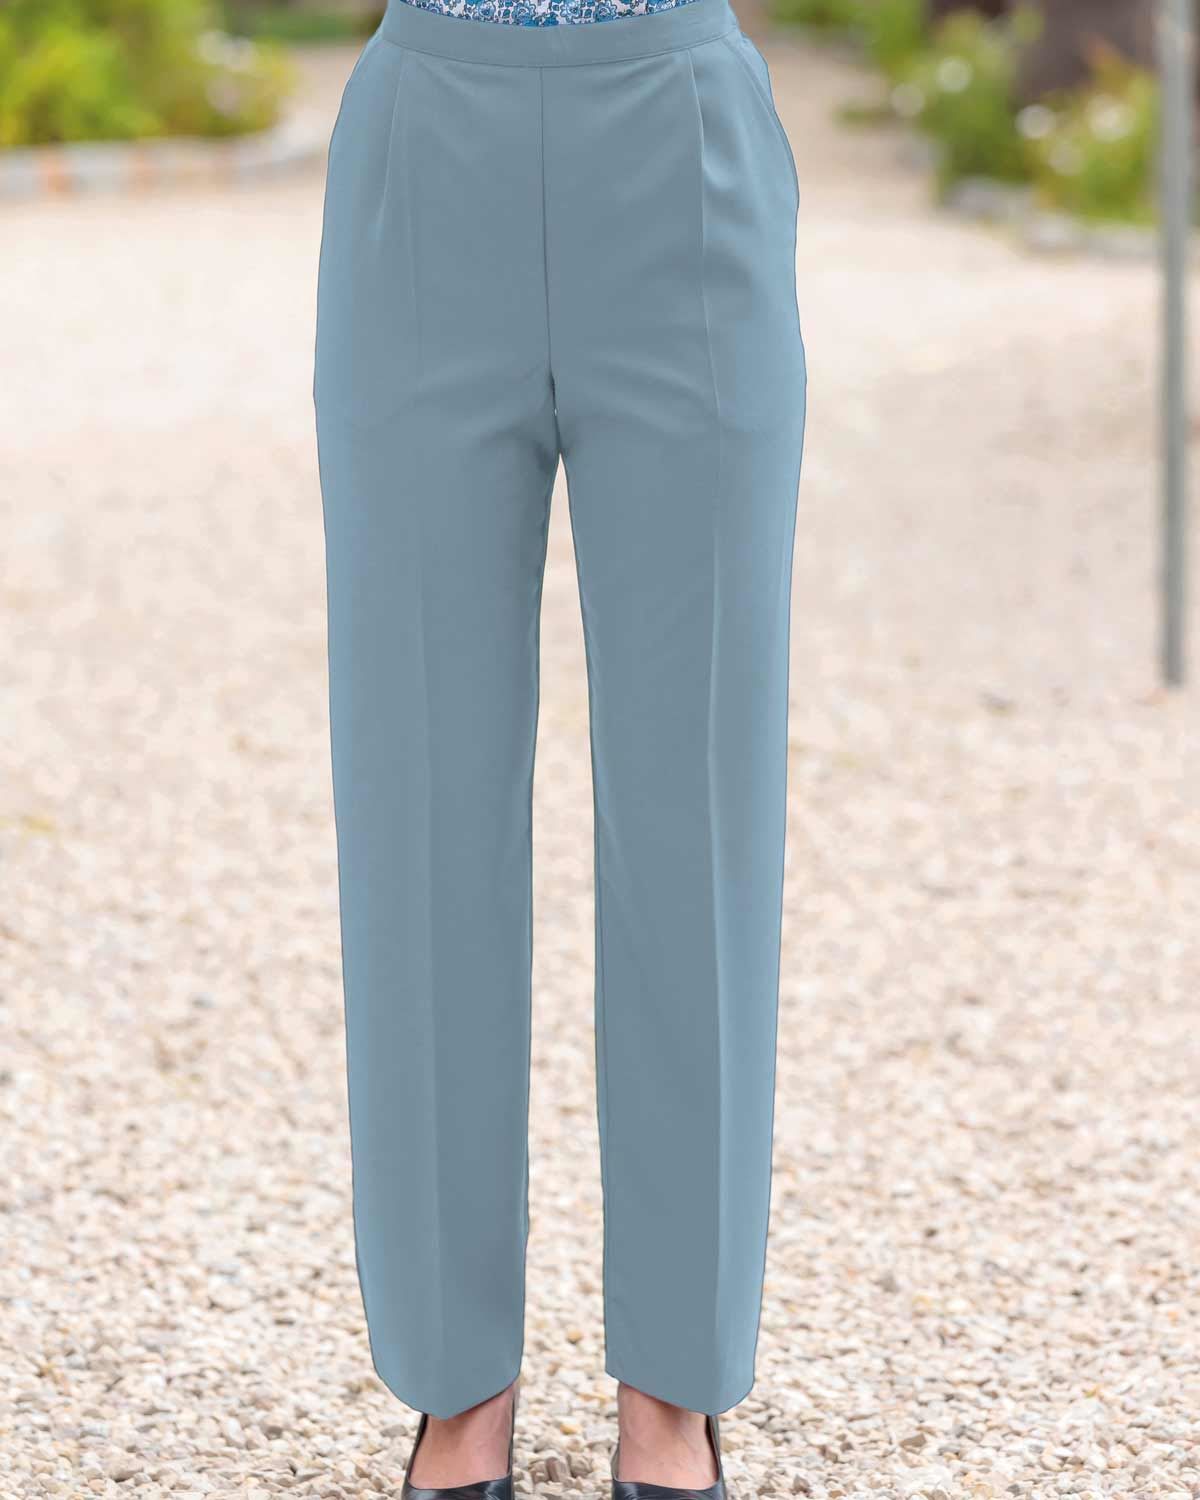 Ladies Sandown Trousers. Comfortable pull on style. Sizes 10-24